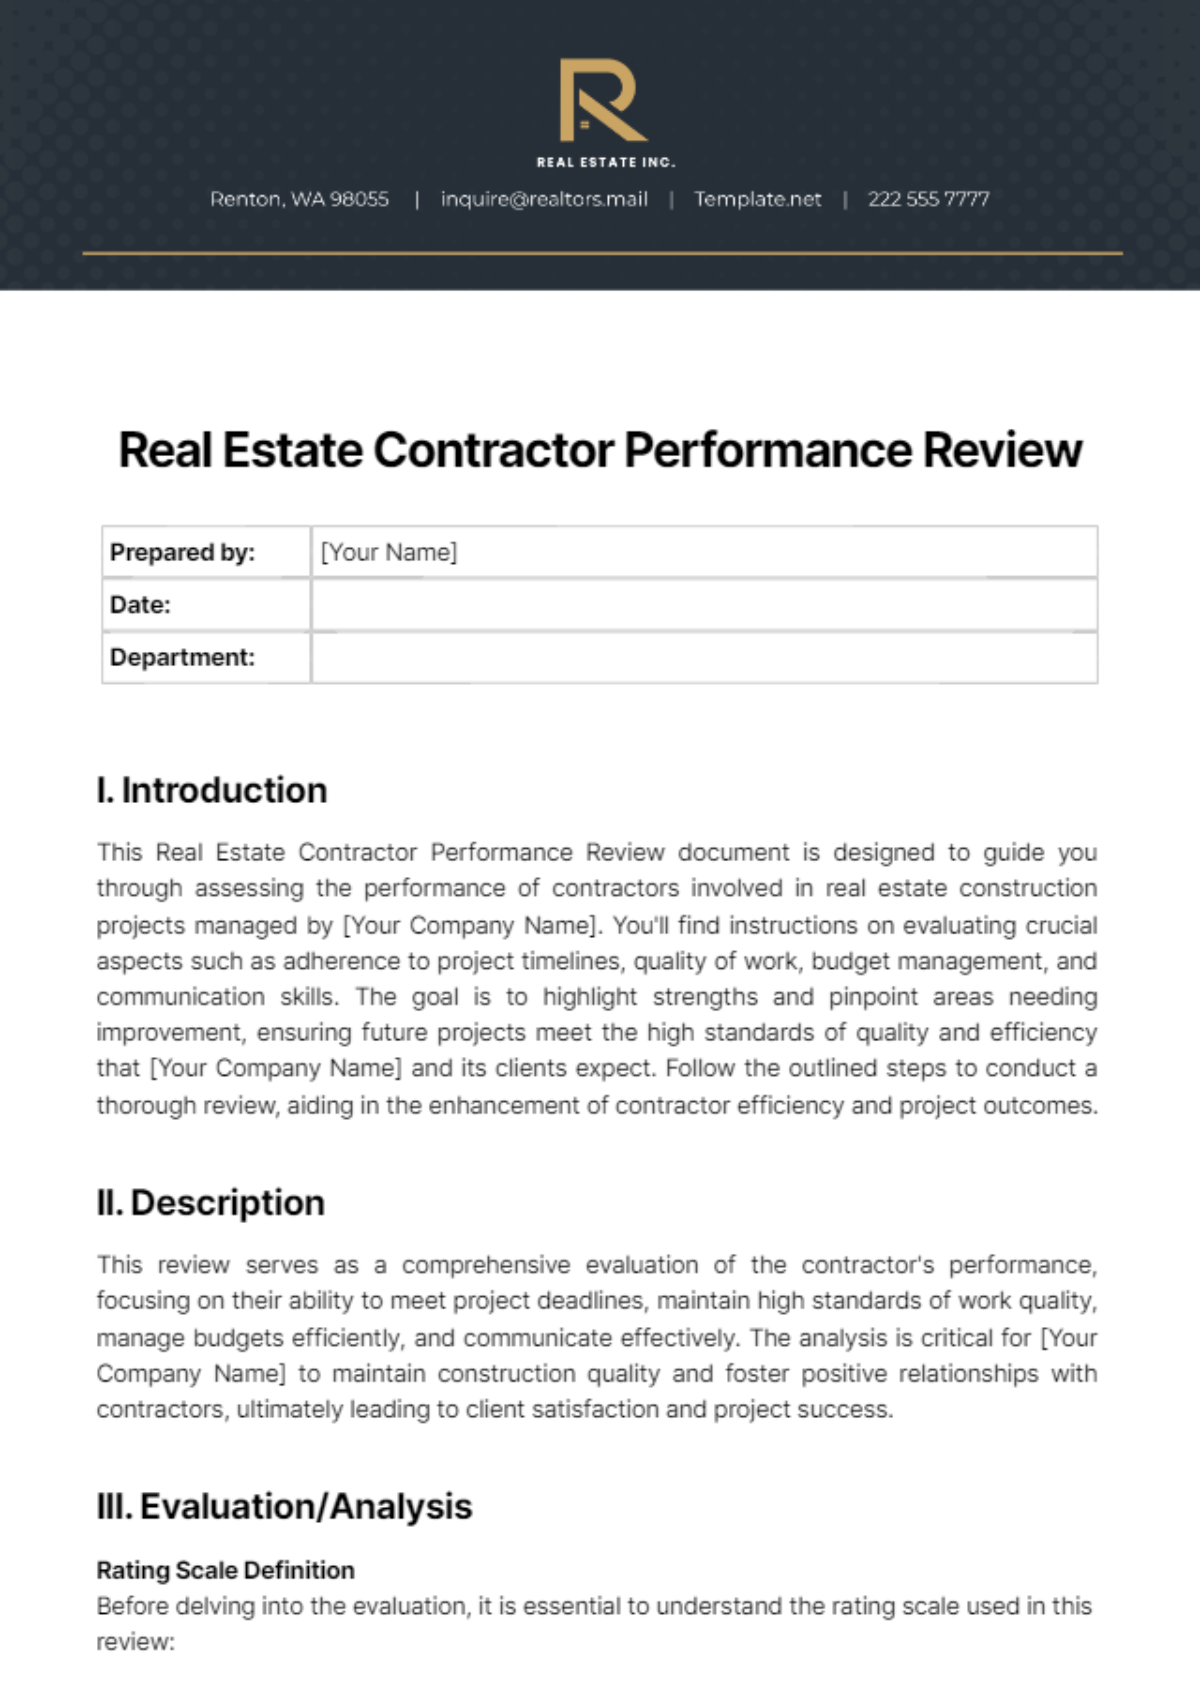 Real Estate Contractor Performance Review Template